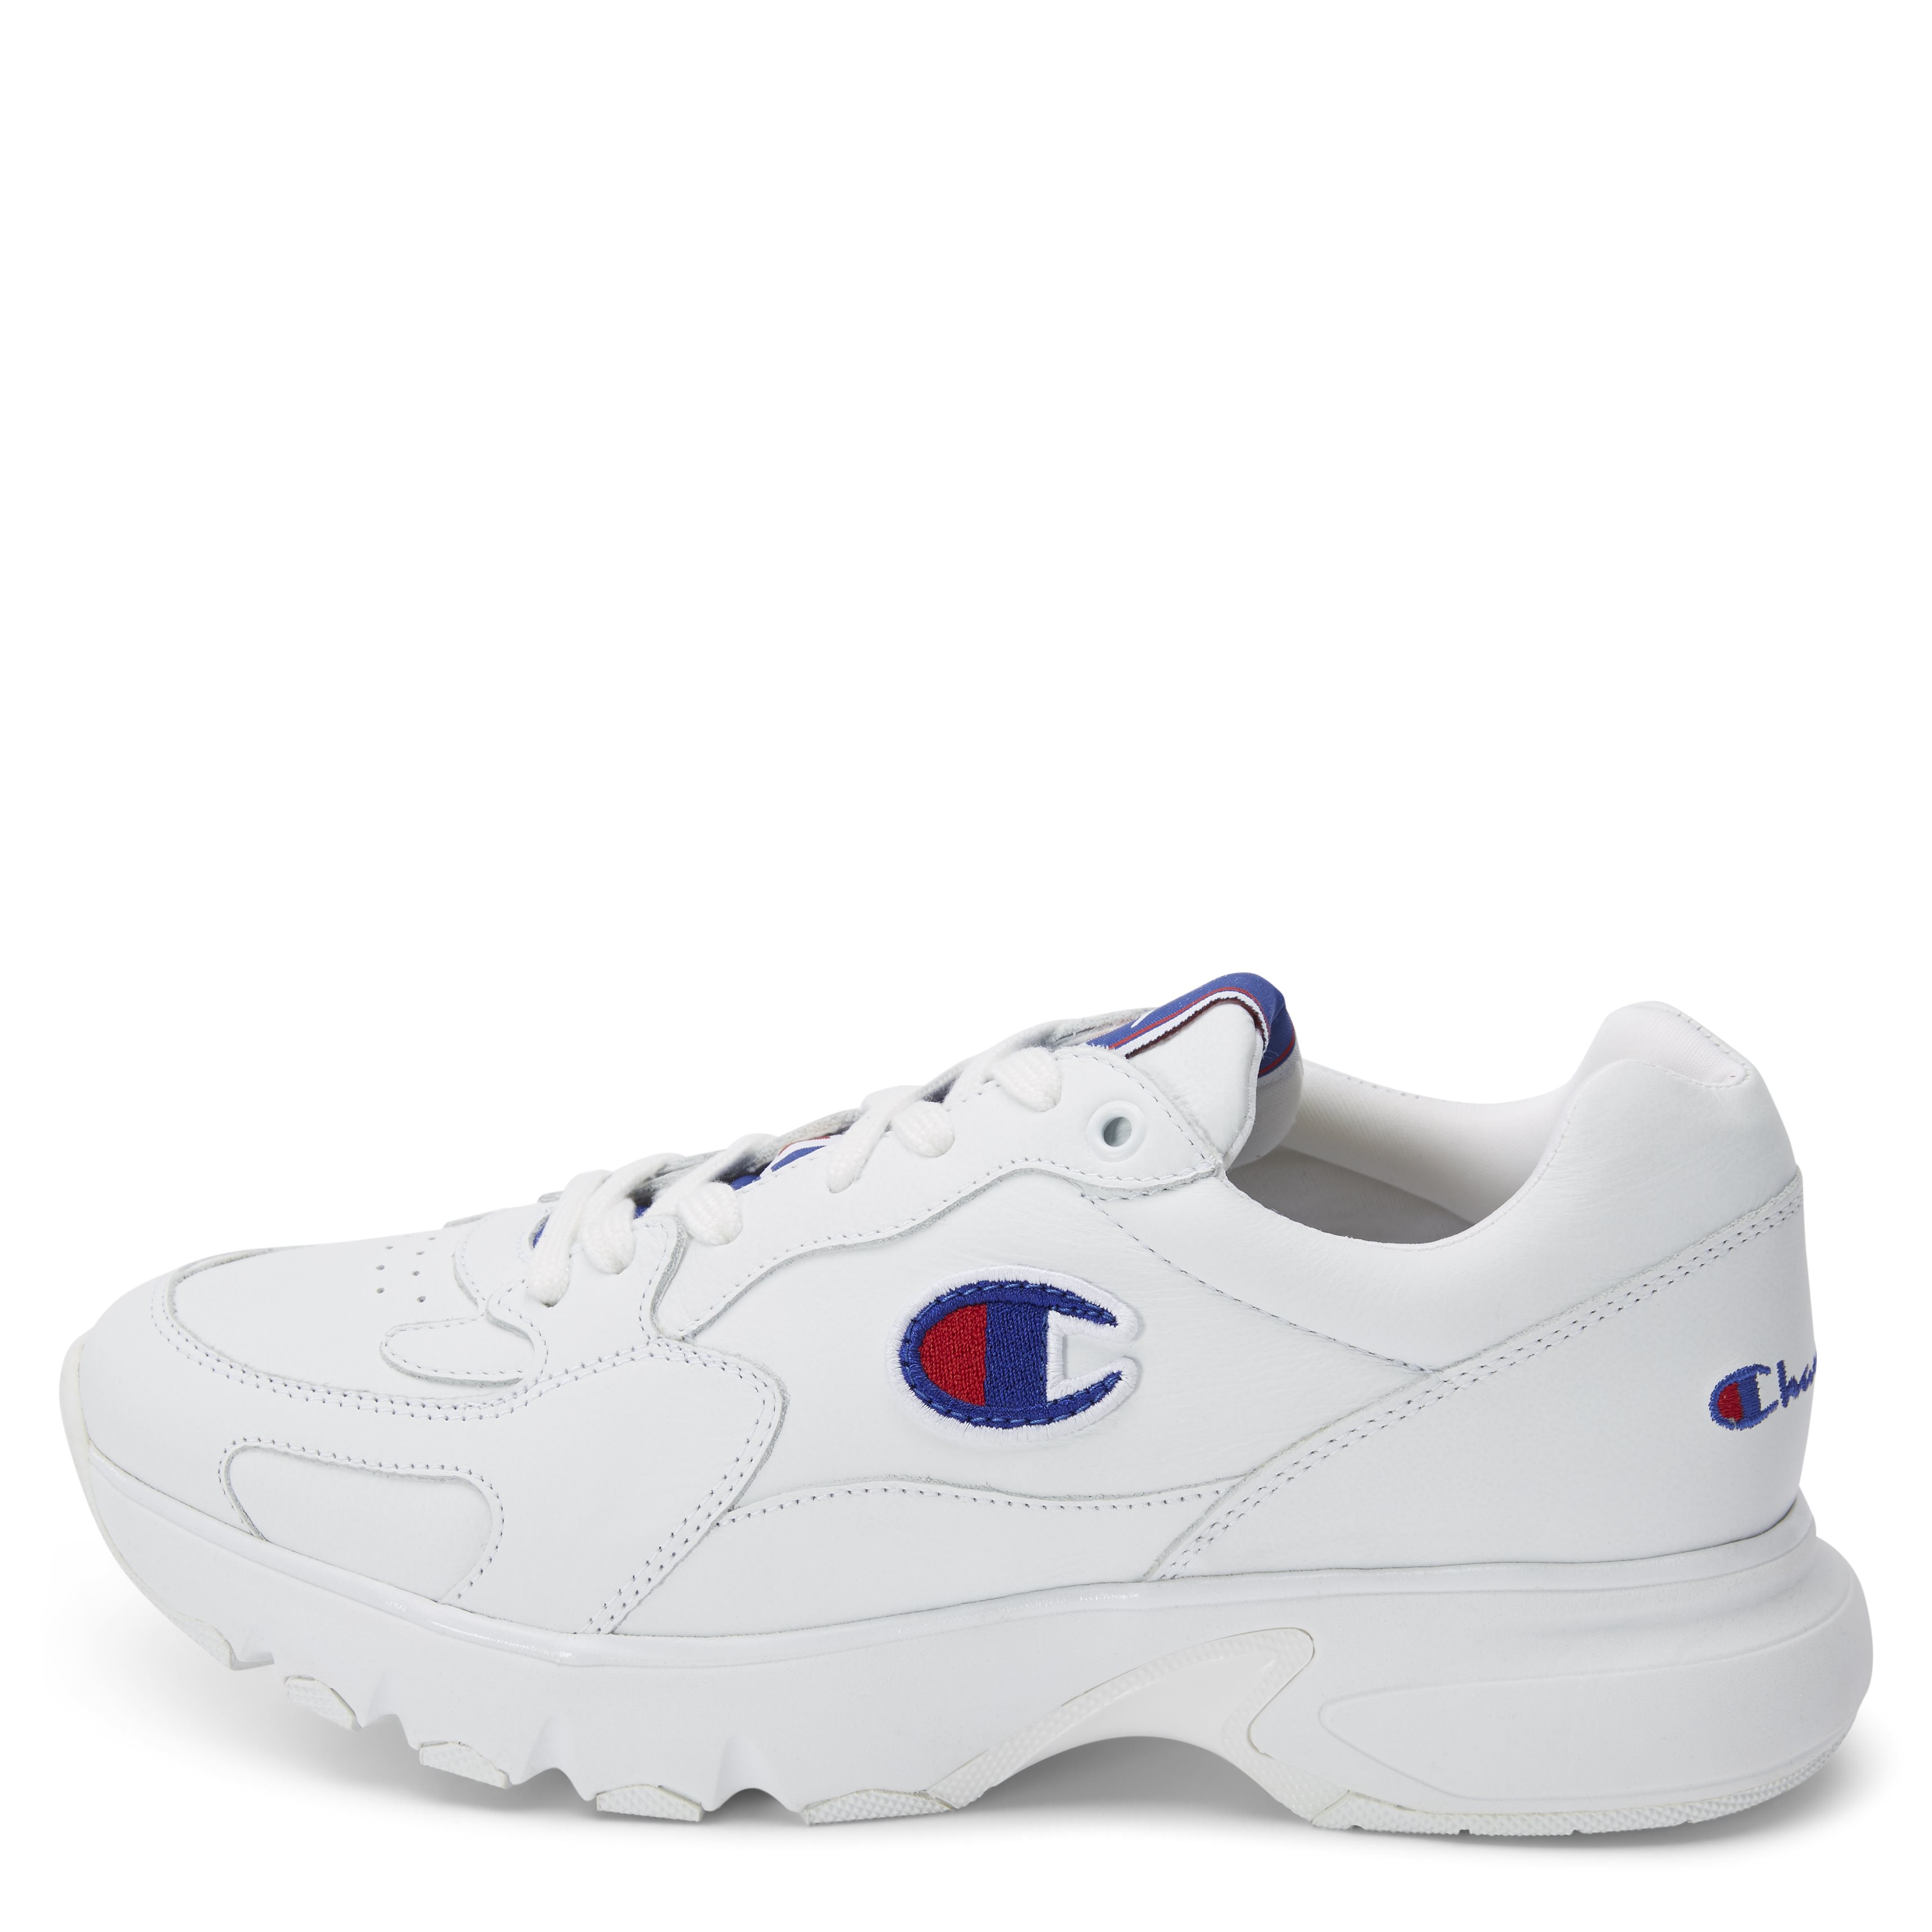 LOW SHOE CWA-1 LEATHER S20850 Shoes HVID from Champion 54 EUR